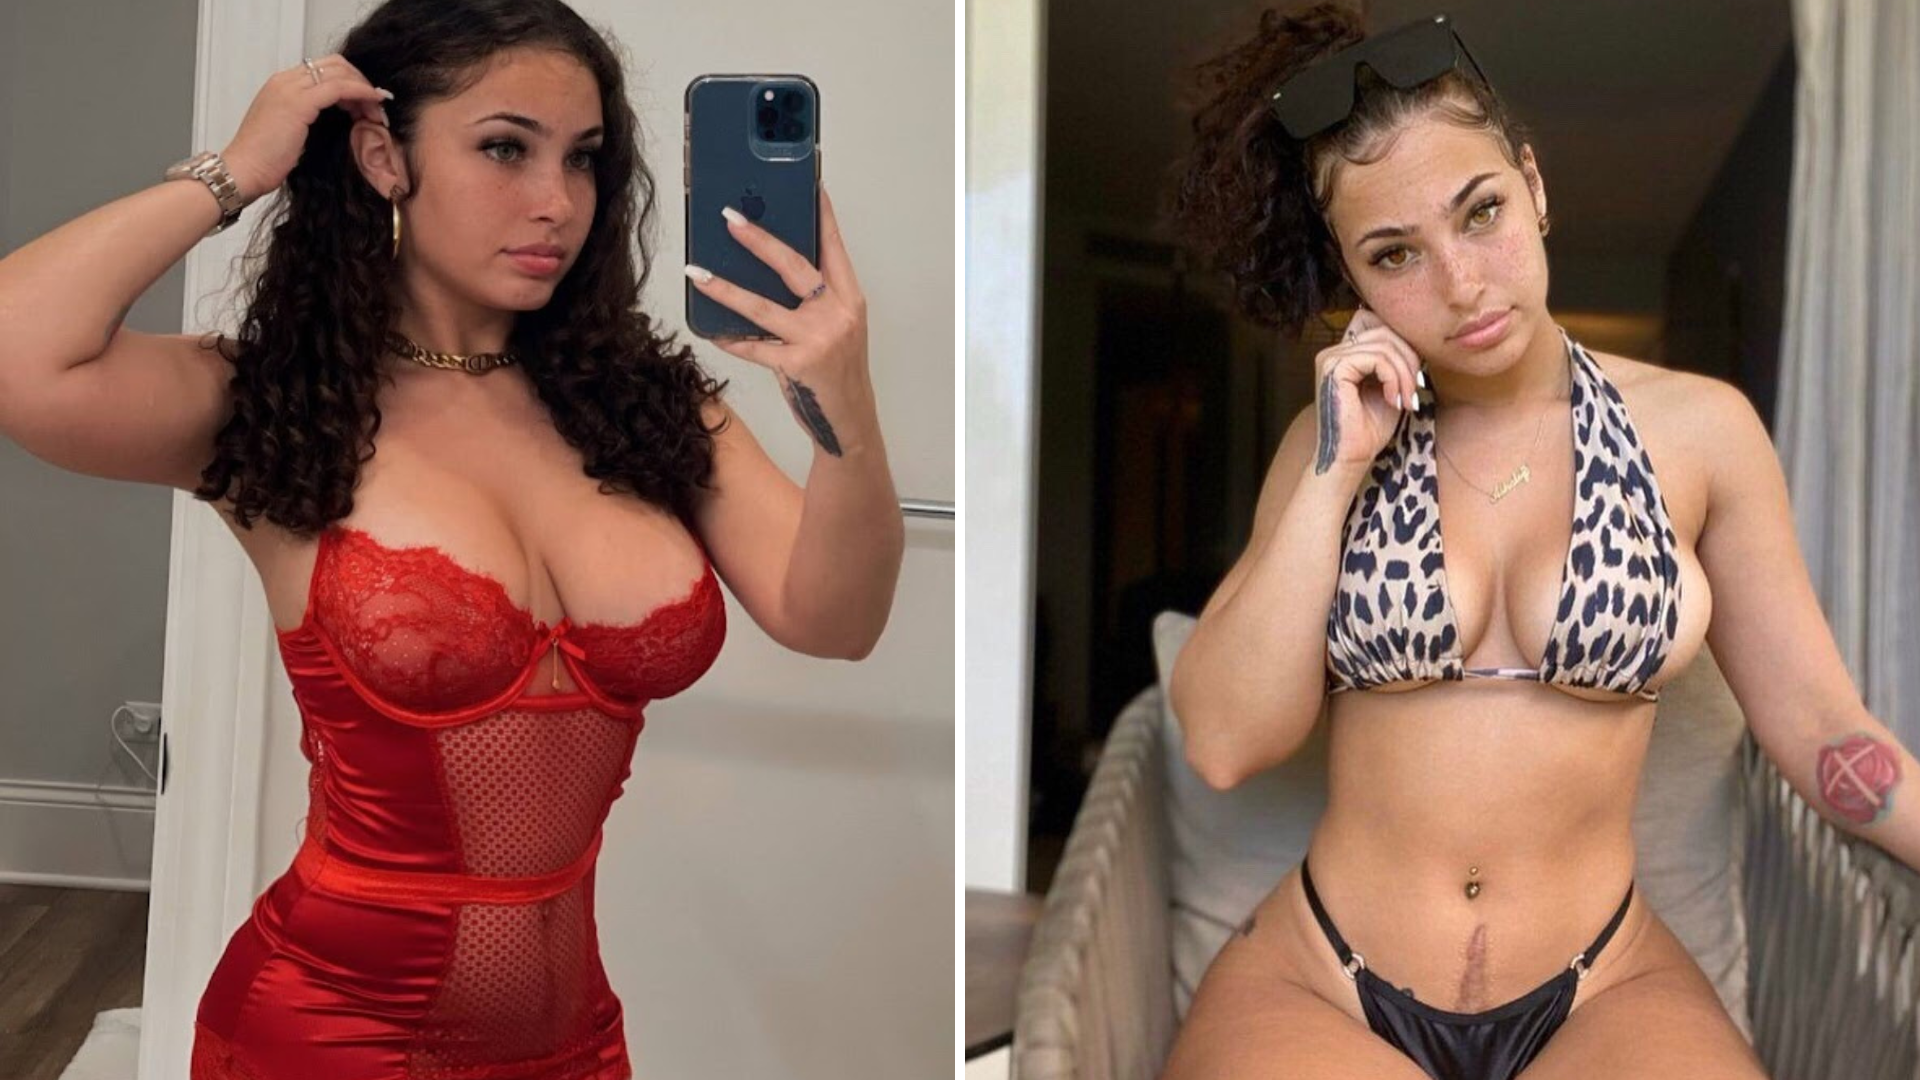 Ash Kaash in sexy red lingerie on the left and black bikini on the right